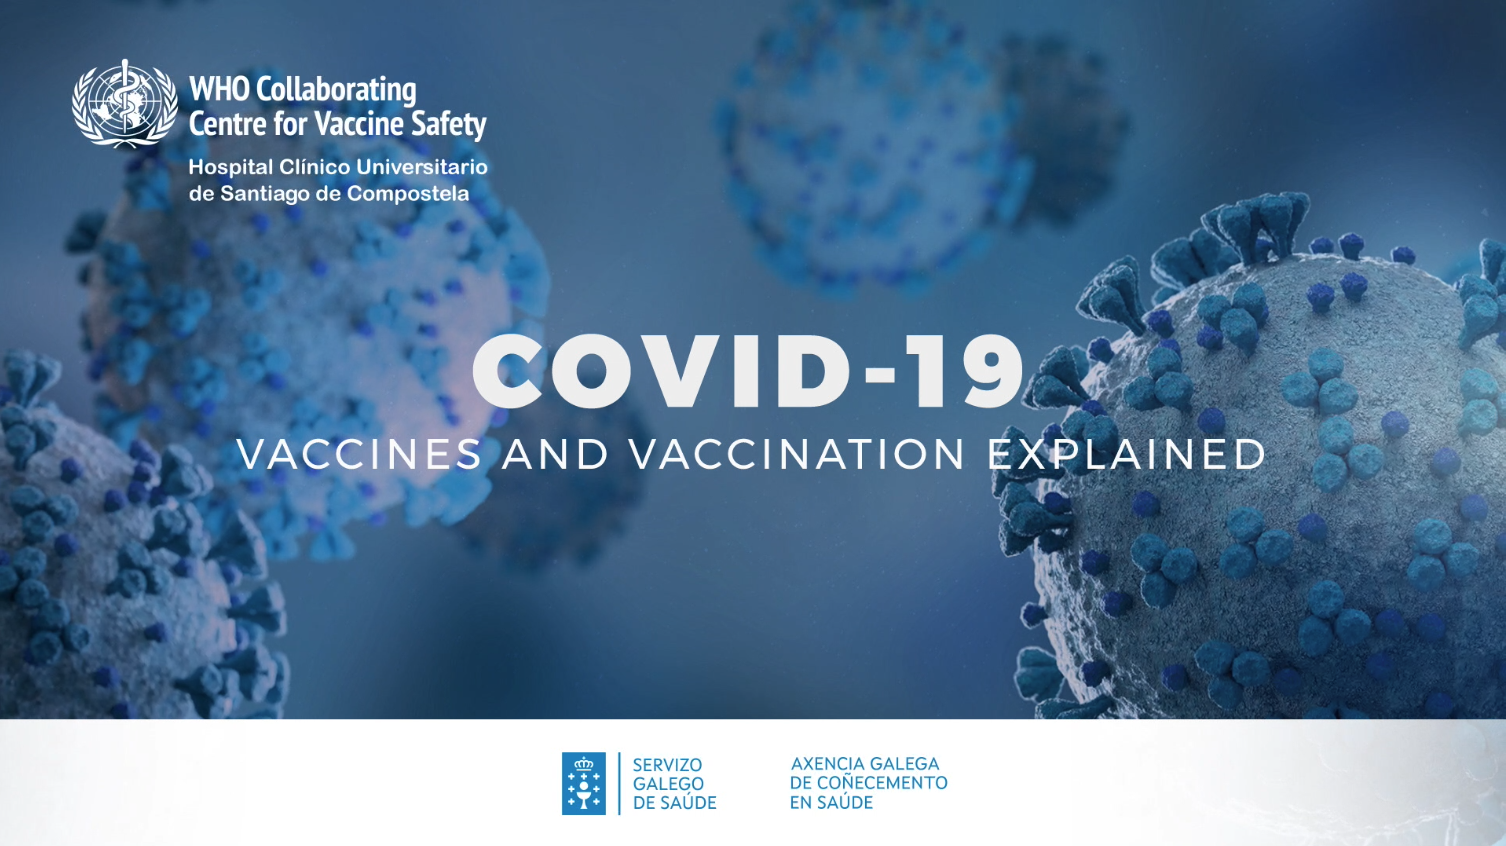 COVID-19 vaccines and vaccination explained